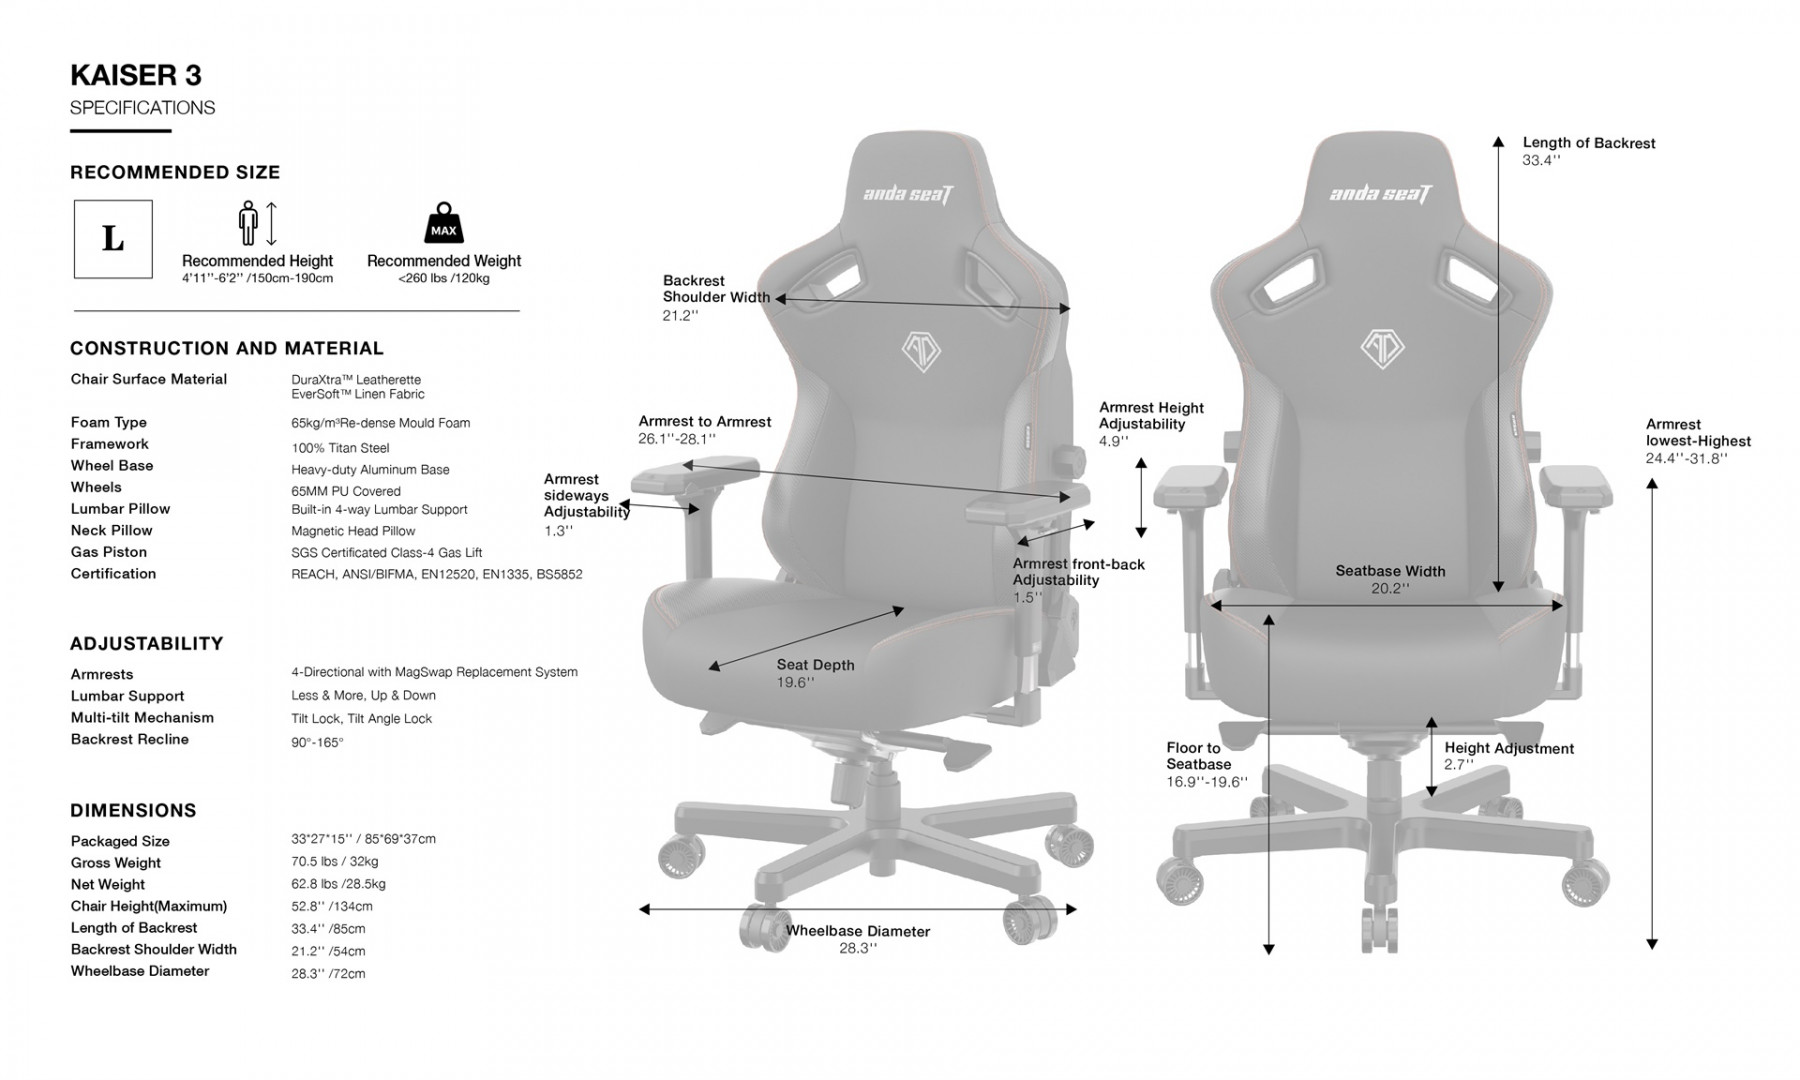 Anda Seat Kaiser 2 review: XL gaming chair goes heavy on comfort